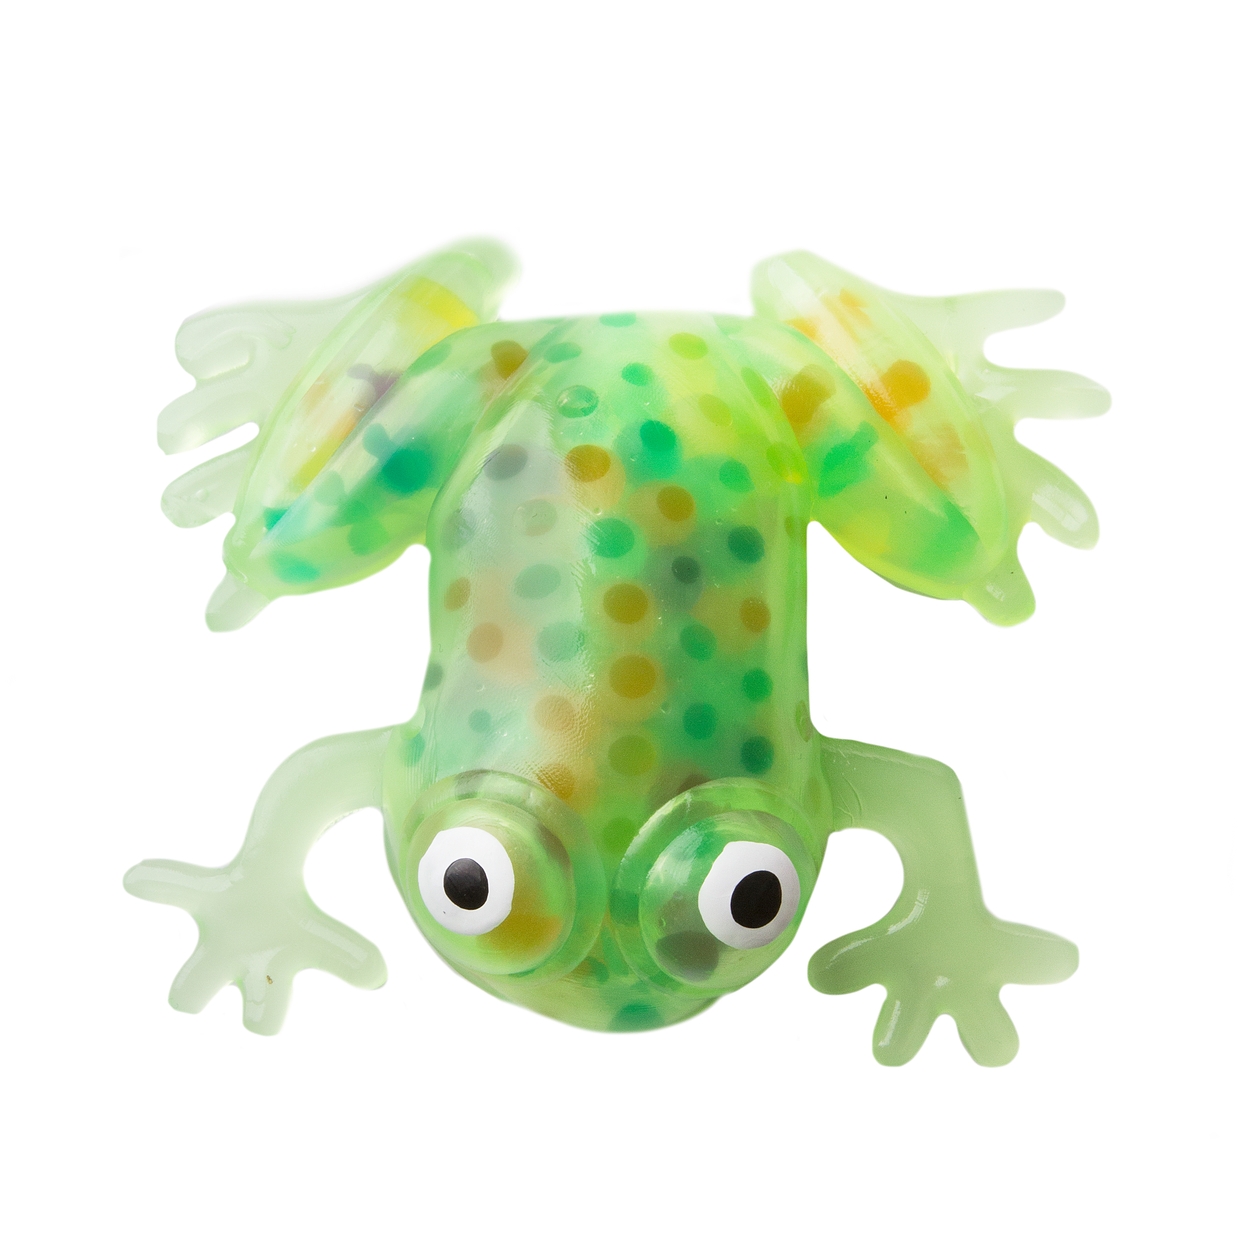 Passover Squish Frog Novelty